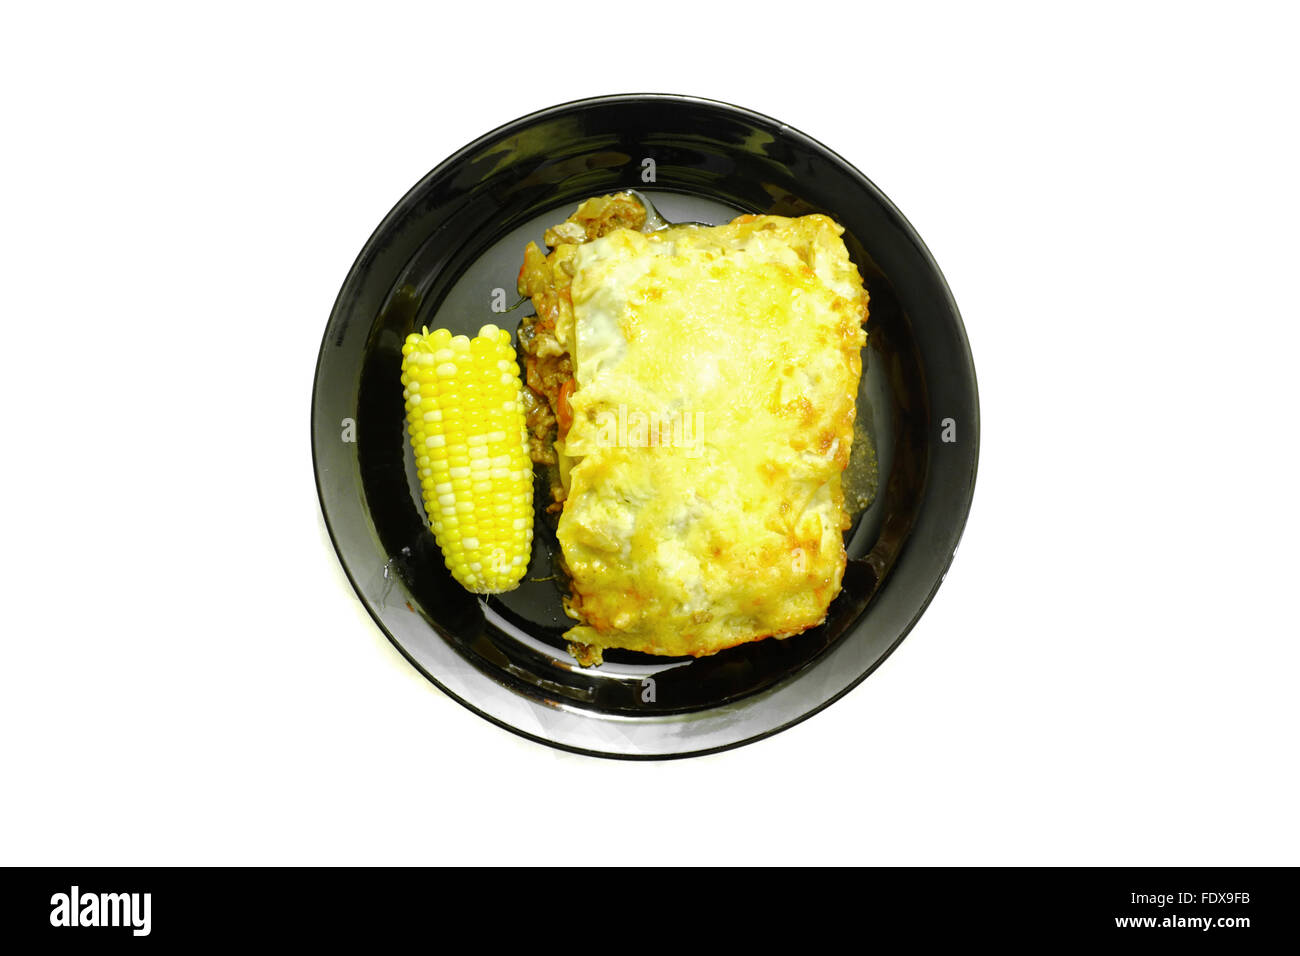 Lasagna and sweetcorn on a black plate photographed against a white background Stock Photo